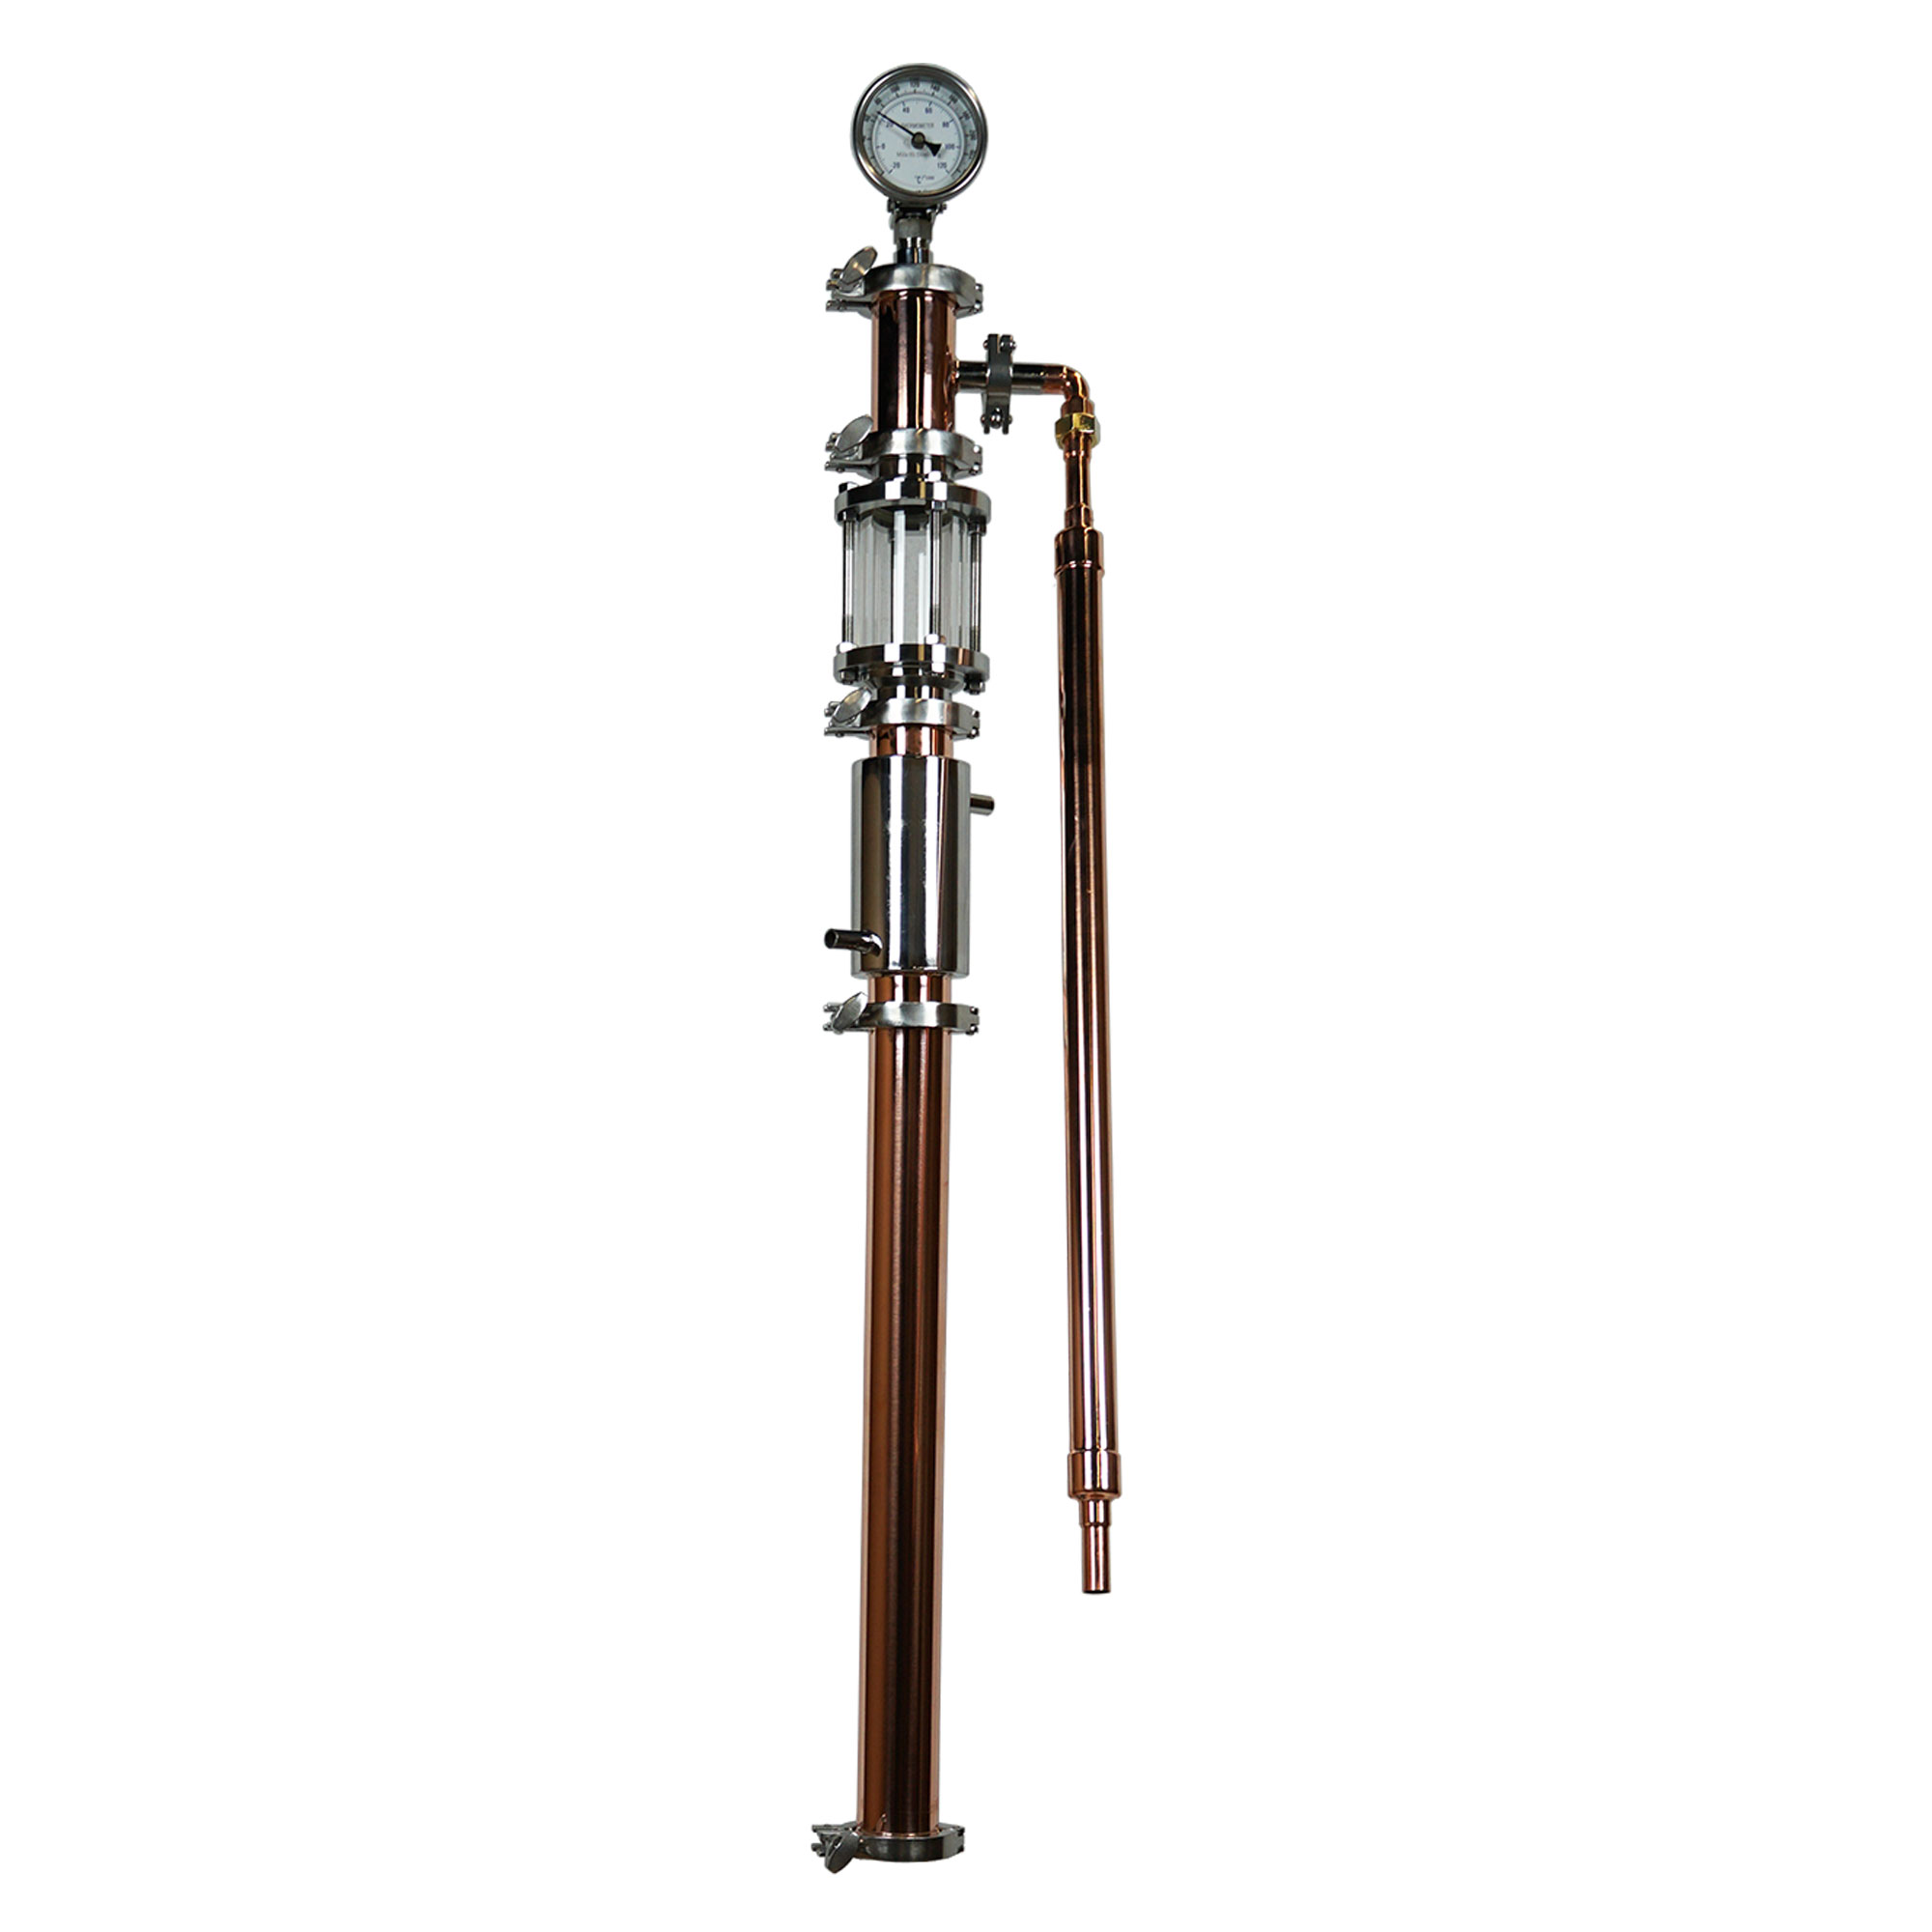 8 Gallon with Copper 2 Inch Diameter Dual Purpose Pro Tower Only